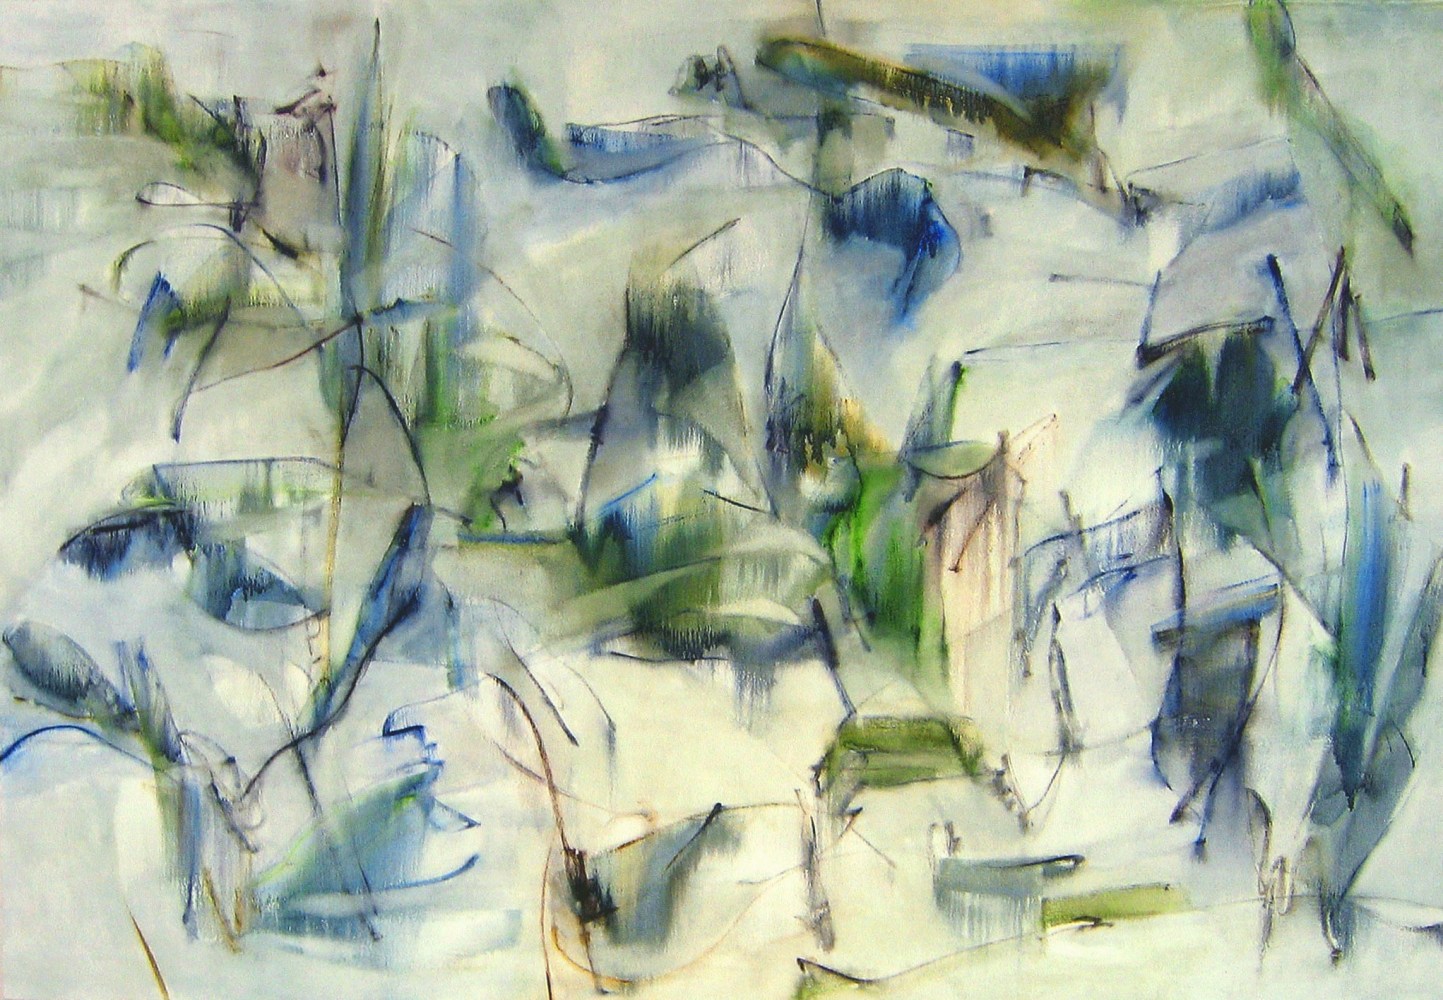 Kind of Blue, 2003

oil on canvas

54 x 78 inches&amp;nbsp;&amp;nbsp;&amp;nbsp;&amp;nbsp;&amp;nbsp;&amp;nbsp;&amp;nbsp;&amp;nbsp;&amp;nbsp;&amp;nbsp;